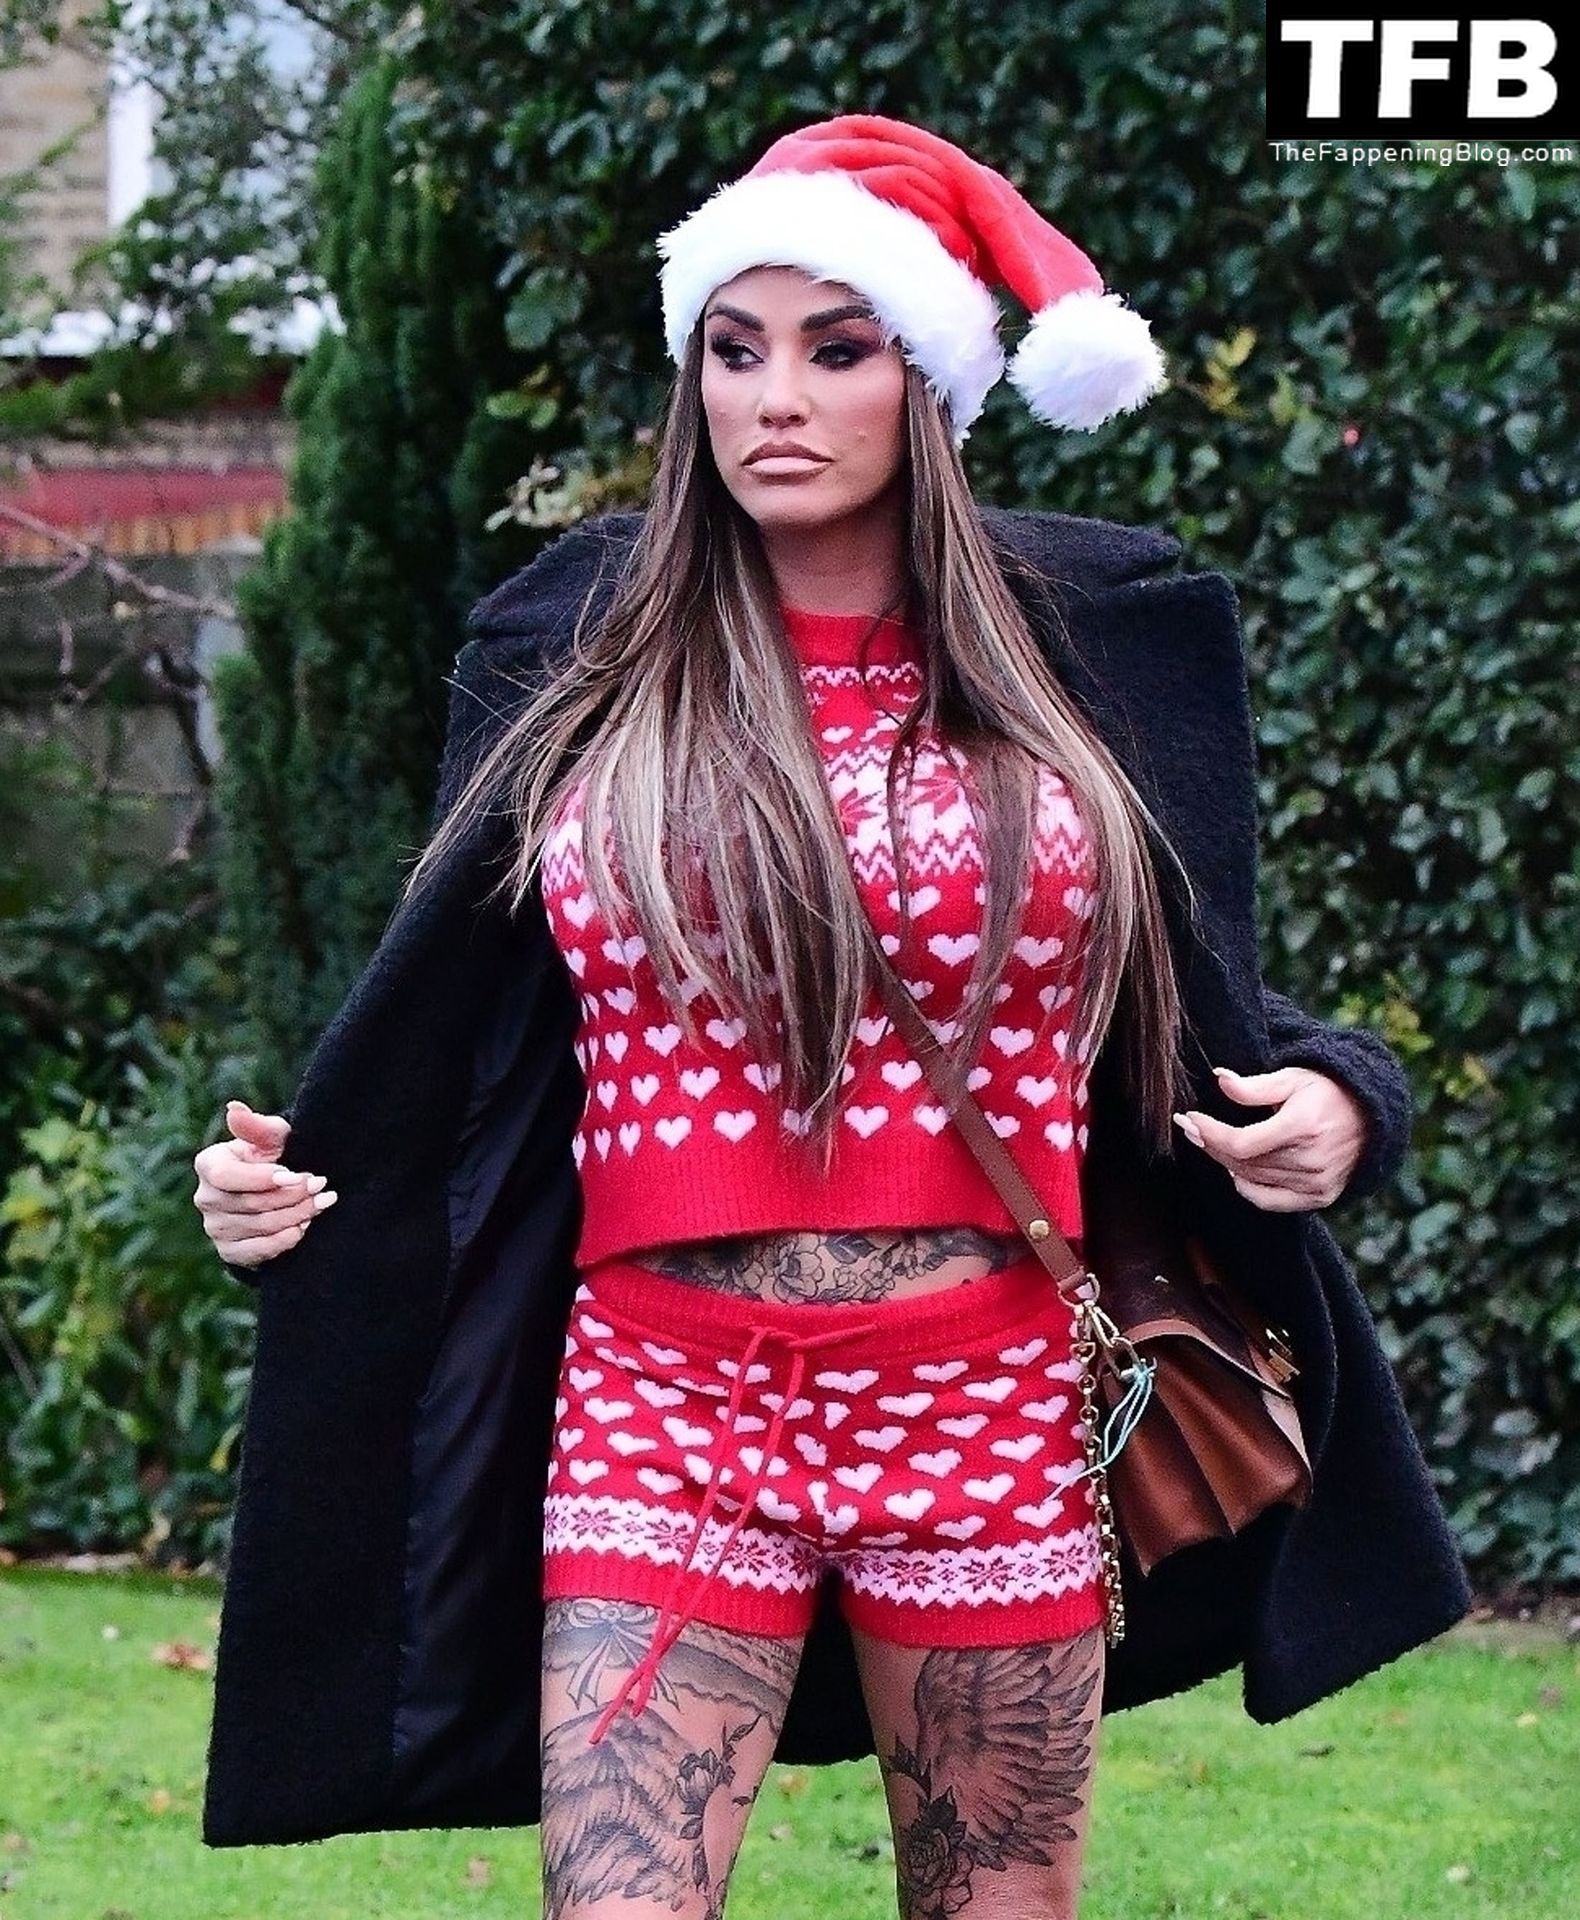 Katie Price Gets Into the Festive Spirit Dressed in Her Sexy Christmas Outfit (34 Photos)